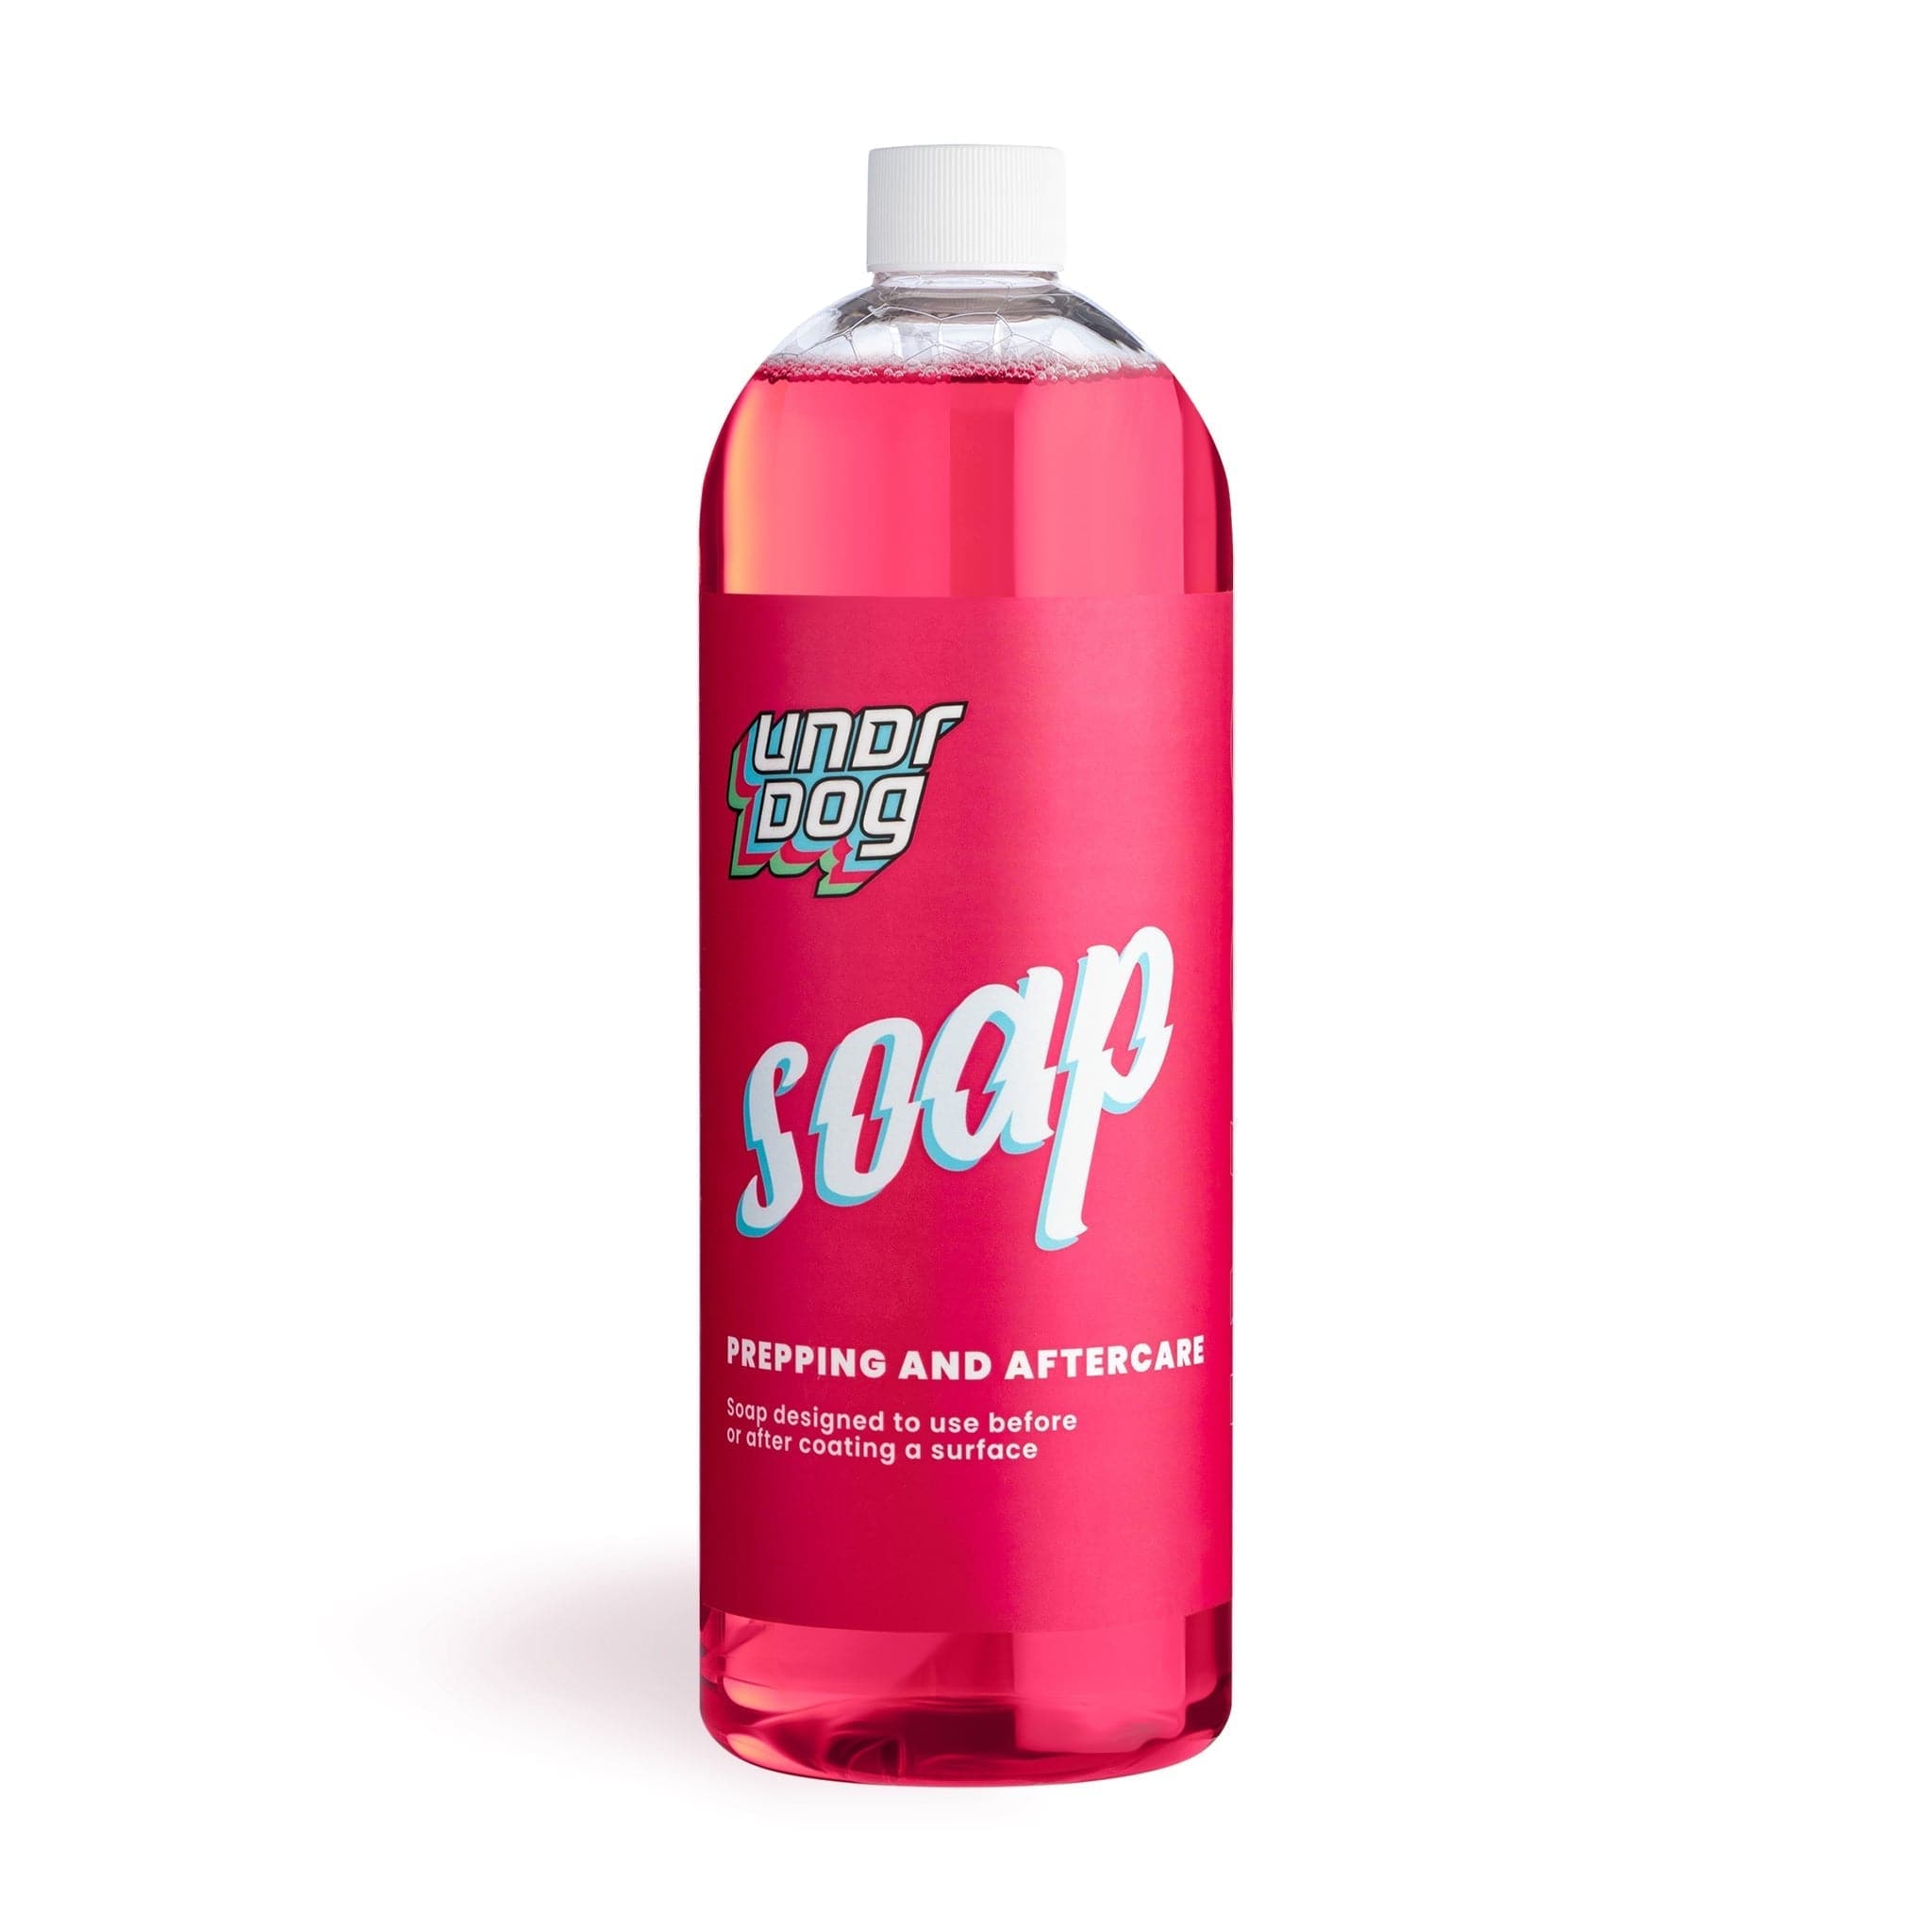 Soap_32oz_85225214-7d2b-465a-be9b-f61cb04a5d46.jpg - ColorPop Car Soap: Vibrant Cleaning for Every Hue! - Undrdog Surface Products